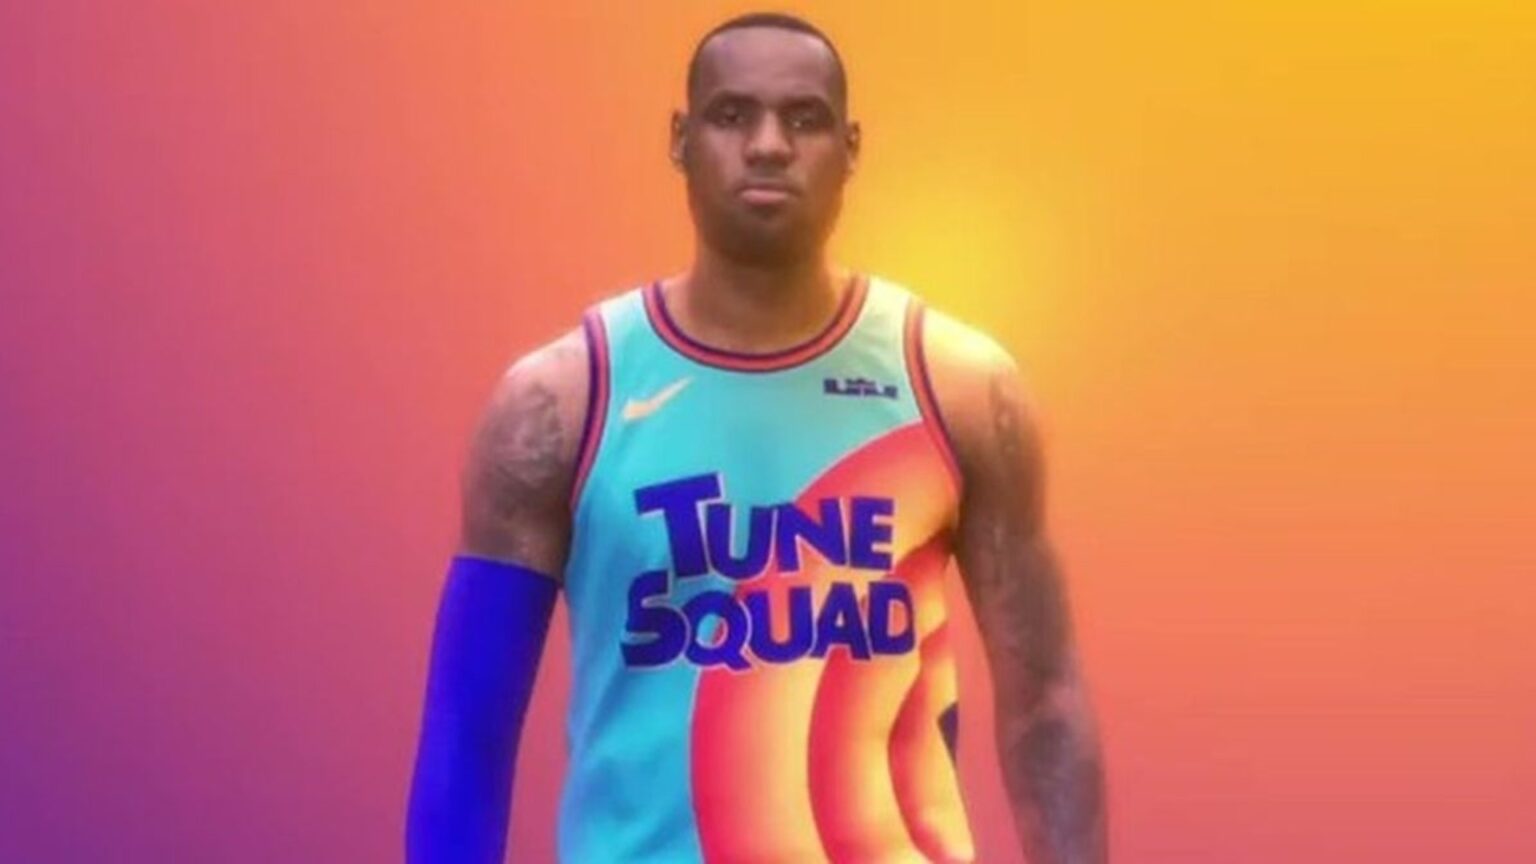 Space Jam: A New Legacy has dropped a bunch of promotional images. Will LeBron James, Bugs Bunny, Lola Bunny, and the rest of the Tune Squad win once more?